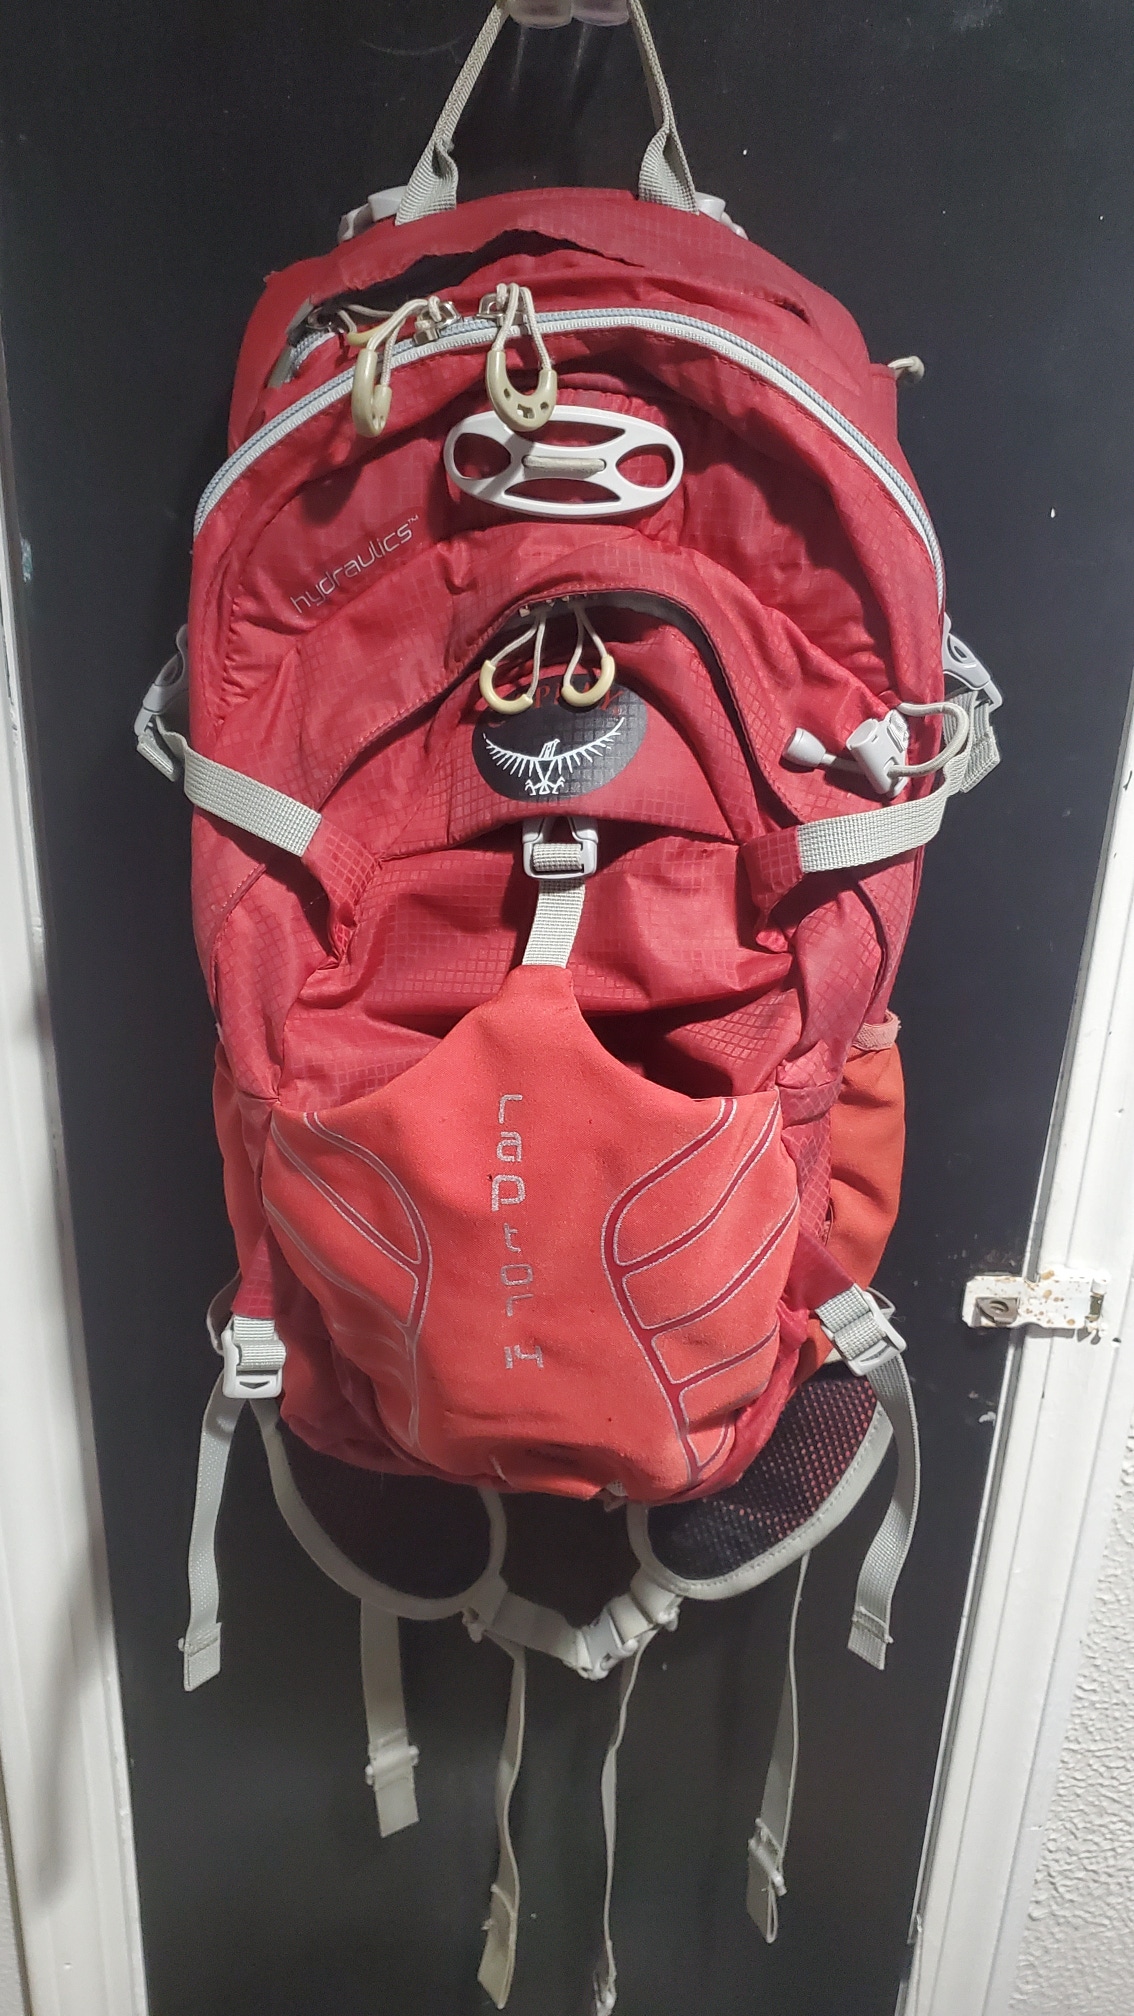 Osprey Raptor 14 Hydration Cycling Backpack - Burnt Orange/Red and Grey - Pre-Owned